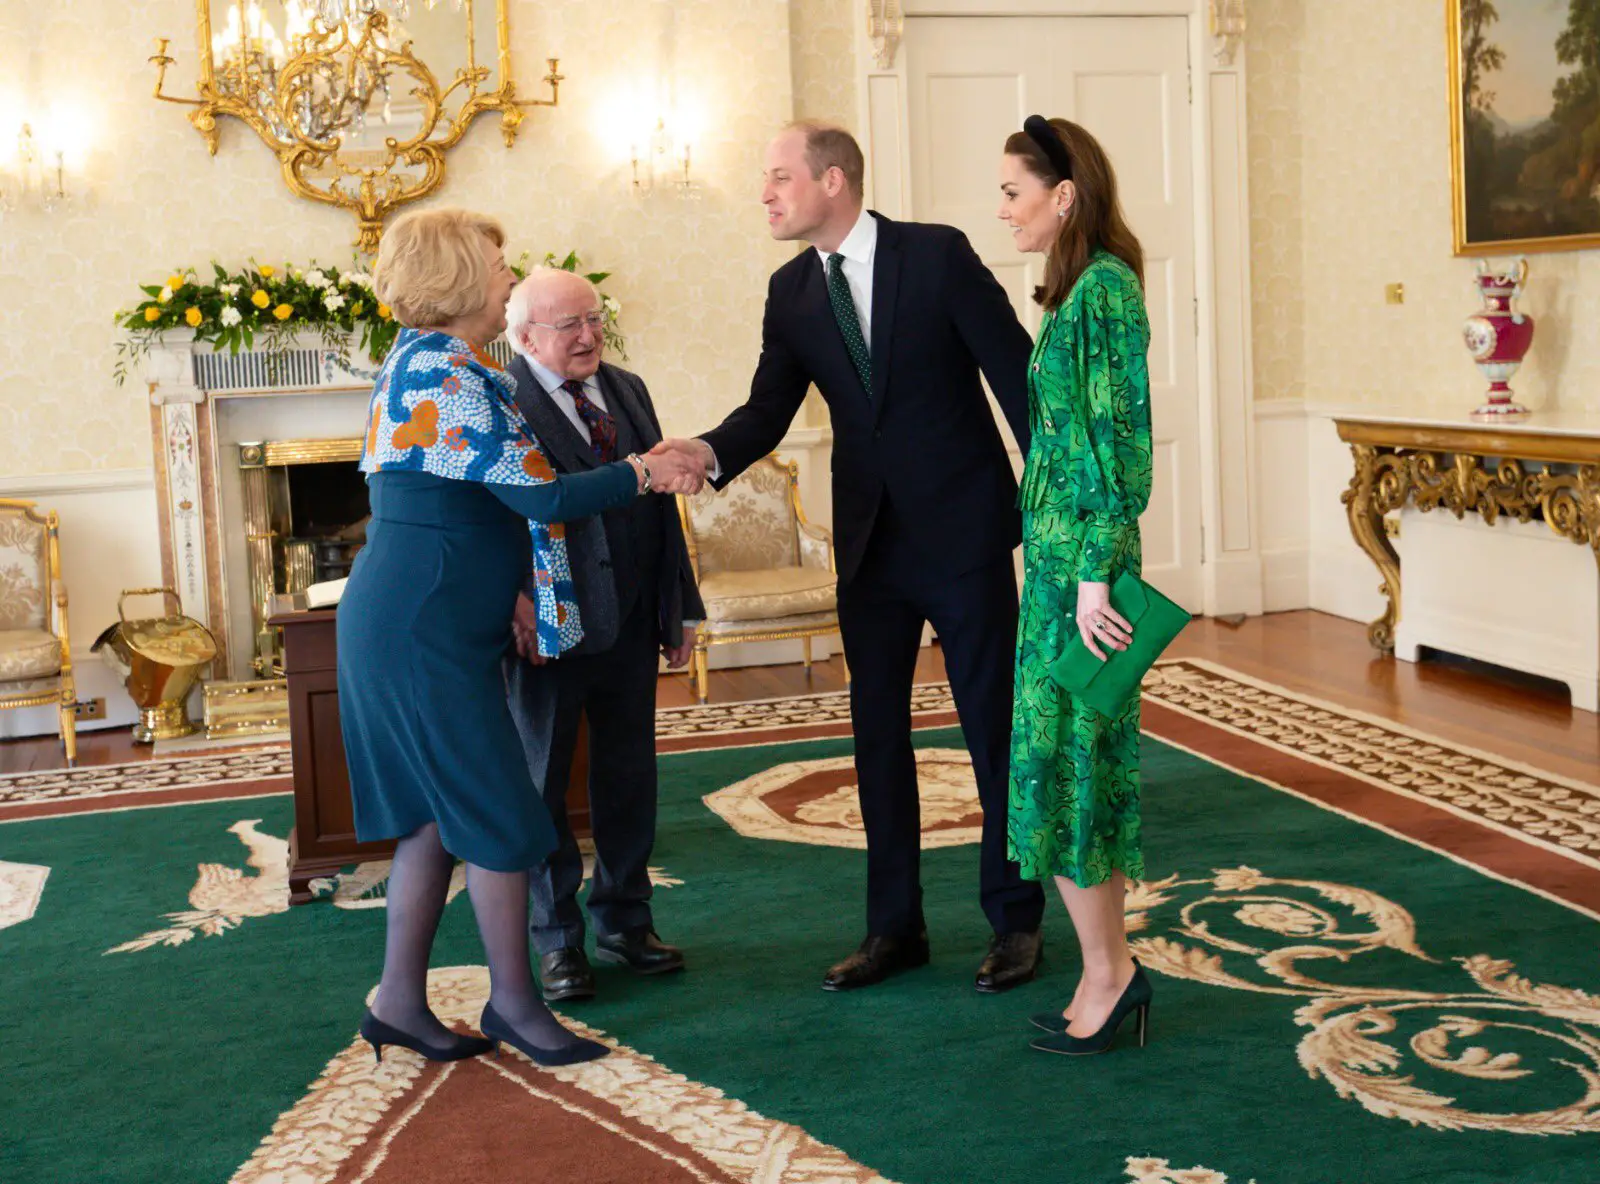 Duke and Duchess of Cambridge met President and First Lady of Ireland for Day one of Irish visit